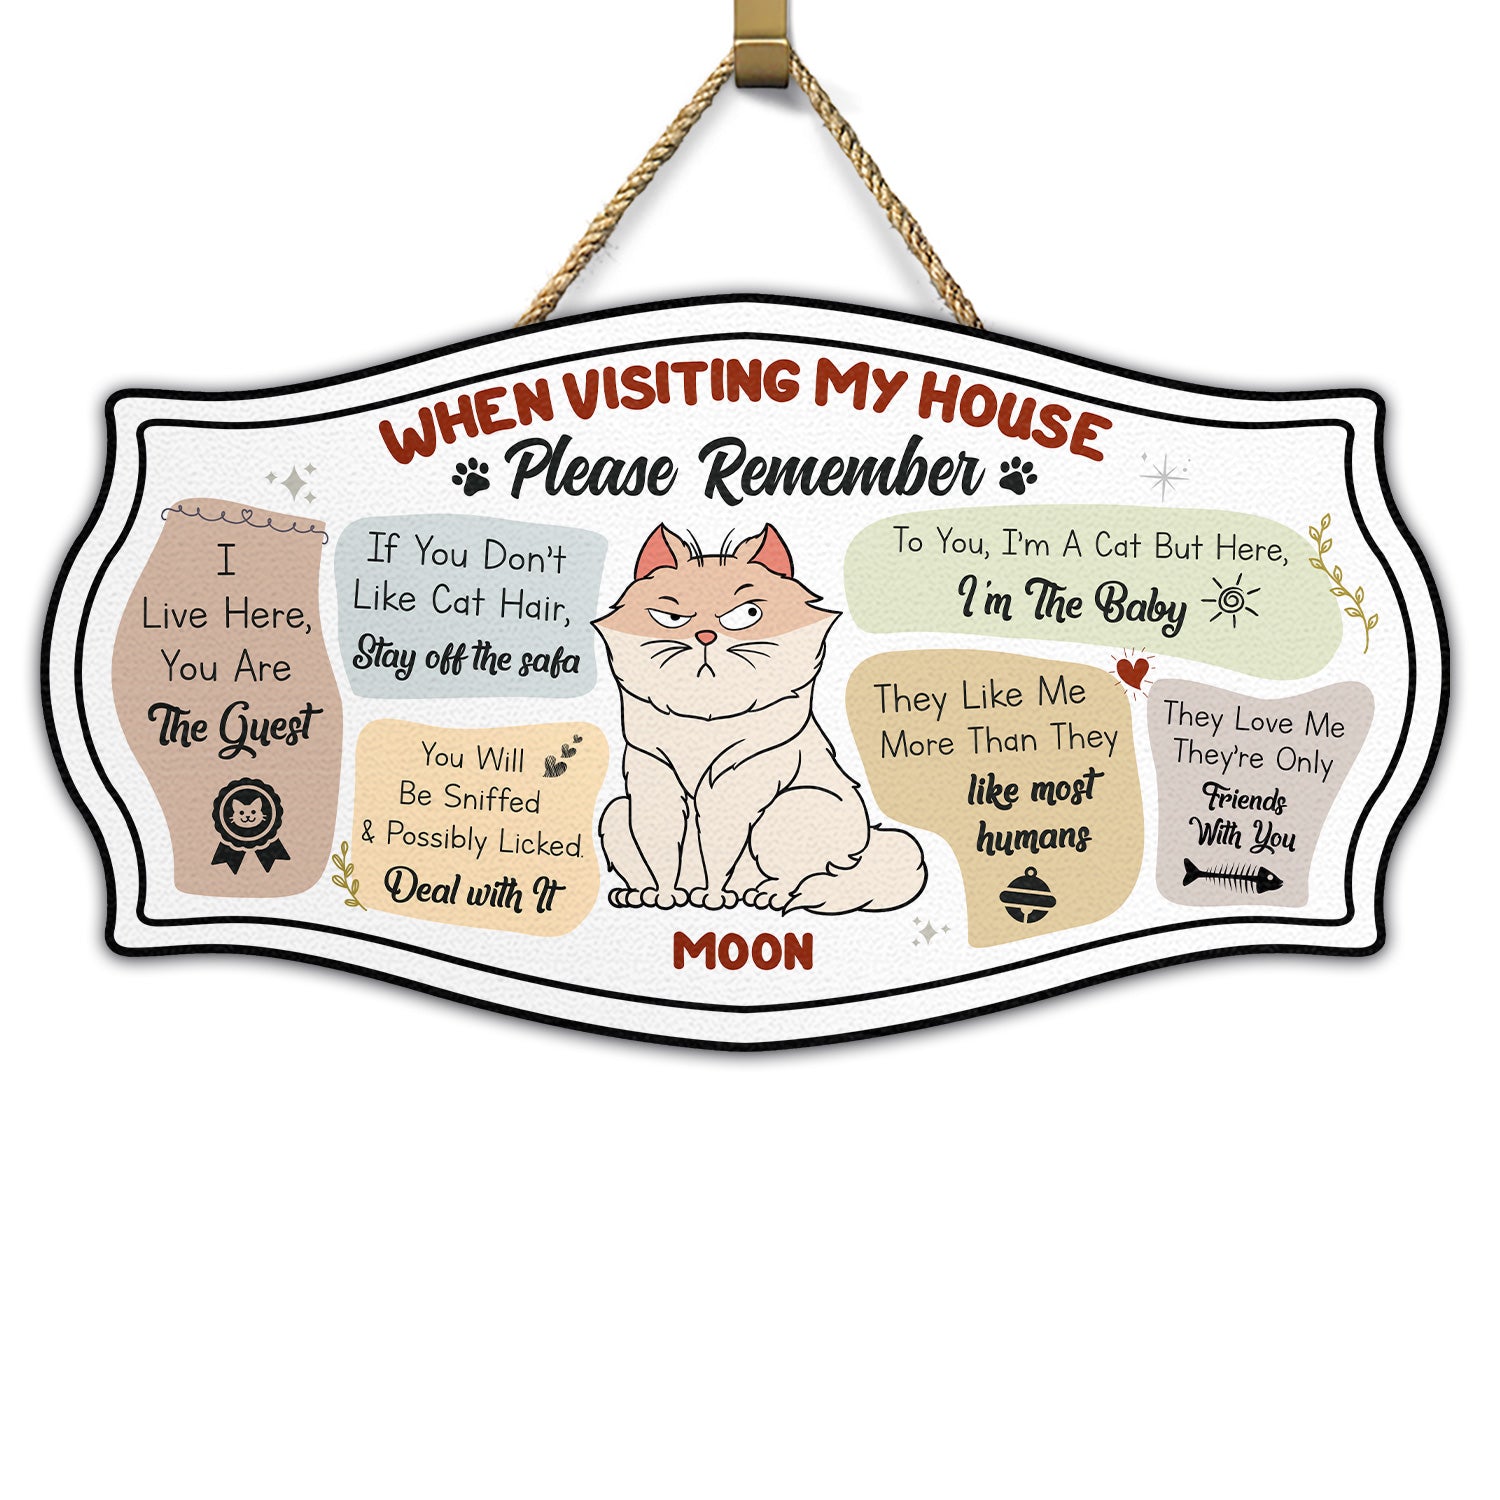 When Visiting My House Please Remember - Gift For Cat Lovers - Personalized Custom Shaped Wood Sign